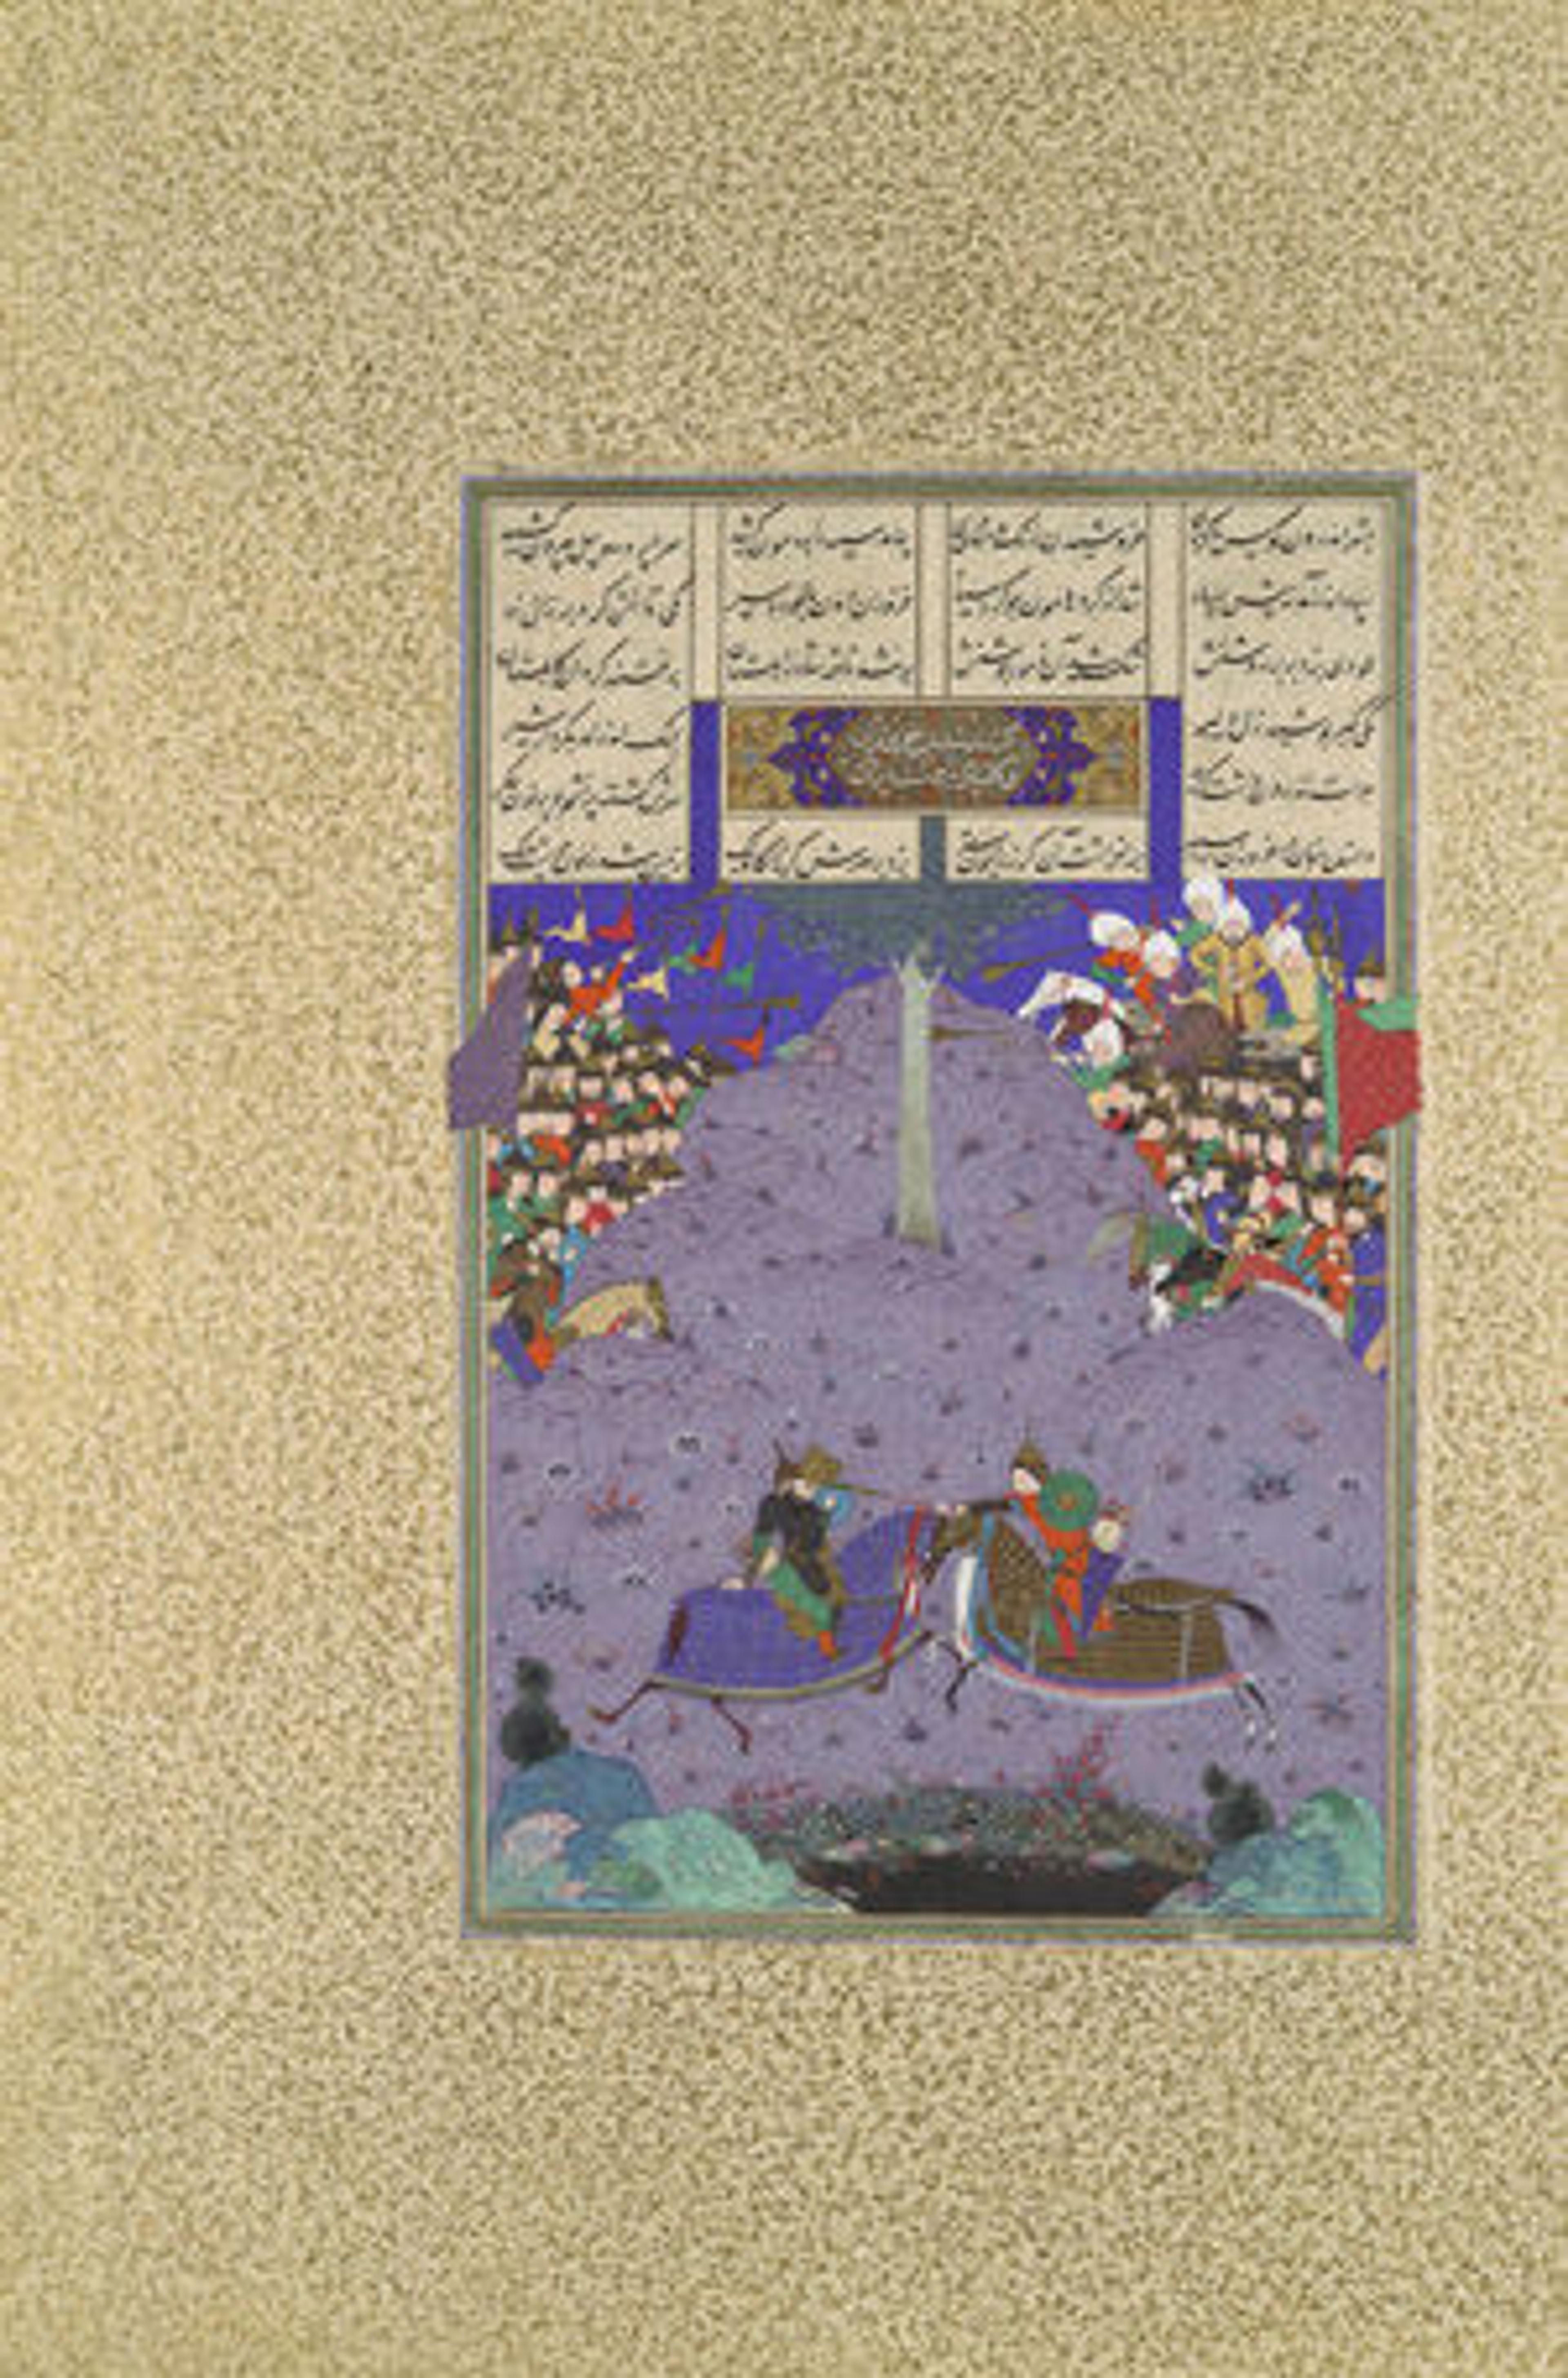 "Zal Slays Khazarvan," Foloi 104r from the Shahnama (Book of Kings) of Shah Tahmasp, ca. 1525–30. Iran, Tabriz. Islamic. Opaque watercolor, ink, silver, and gold on paper. The Metropolitan Museum of Art, New York, Gift of Arthur A. Houghton Jr., 1970 (1970.301.15)